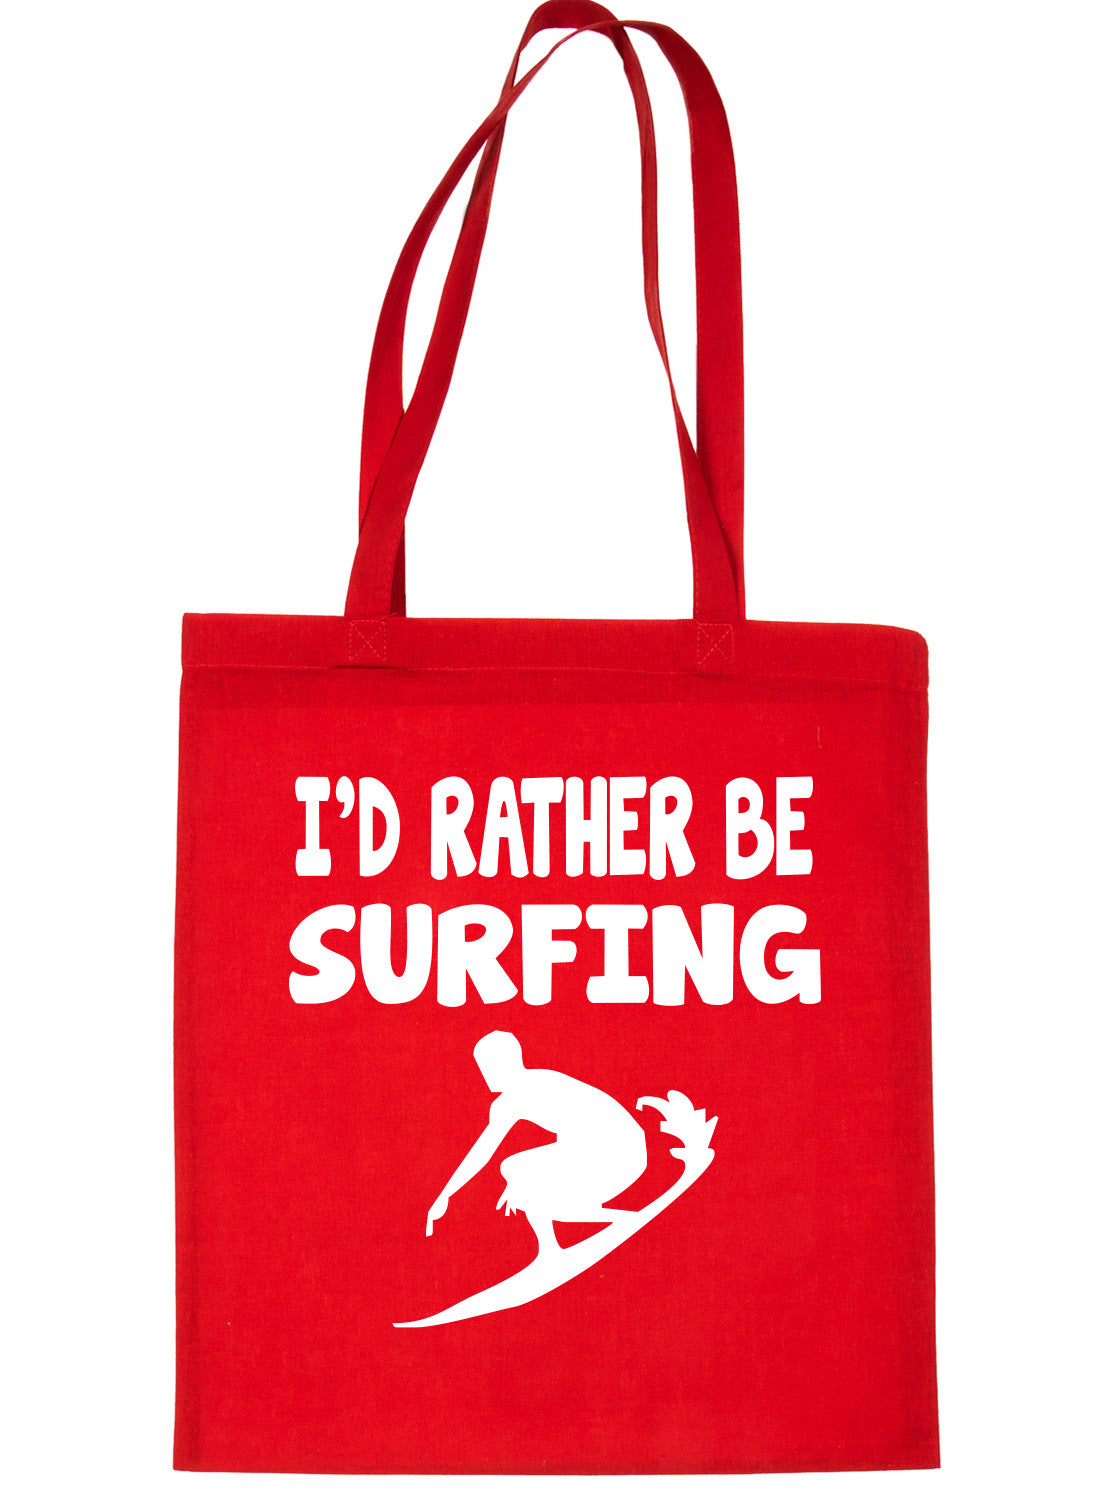 I'd Rather Be Surfing Surfer Shopping Tote Bag Ladies Gift